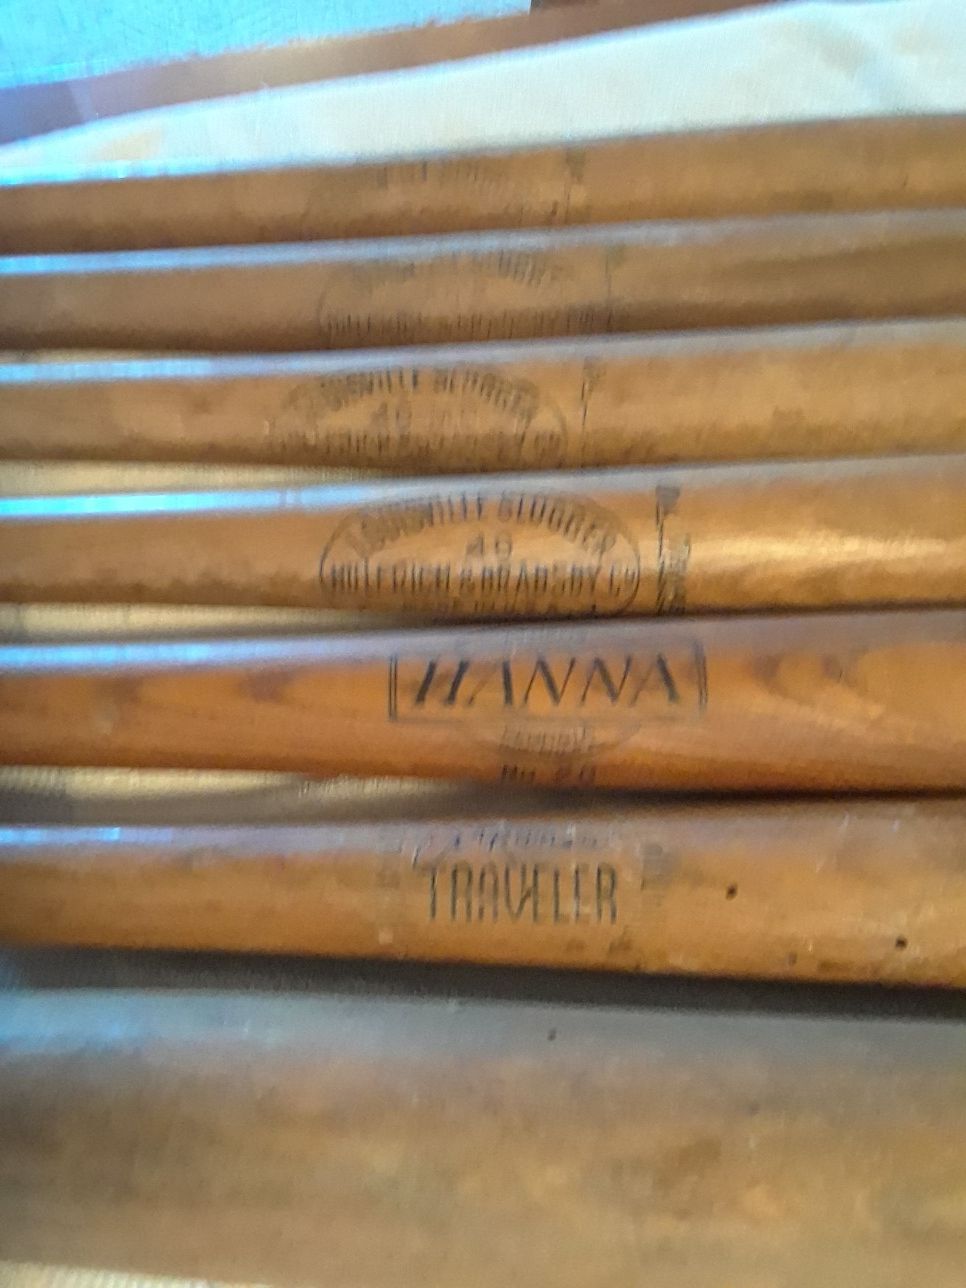 Firewood if no offers!😀 Reduced price-Antique baseball bats from 1930's to 1940's: MAKE OFFER